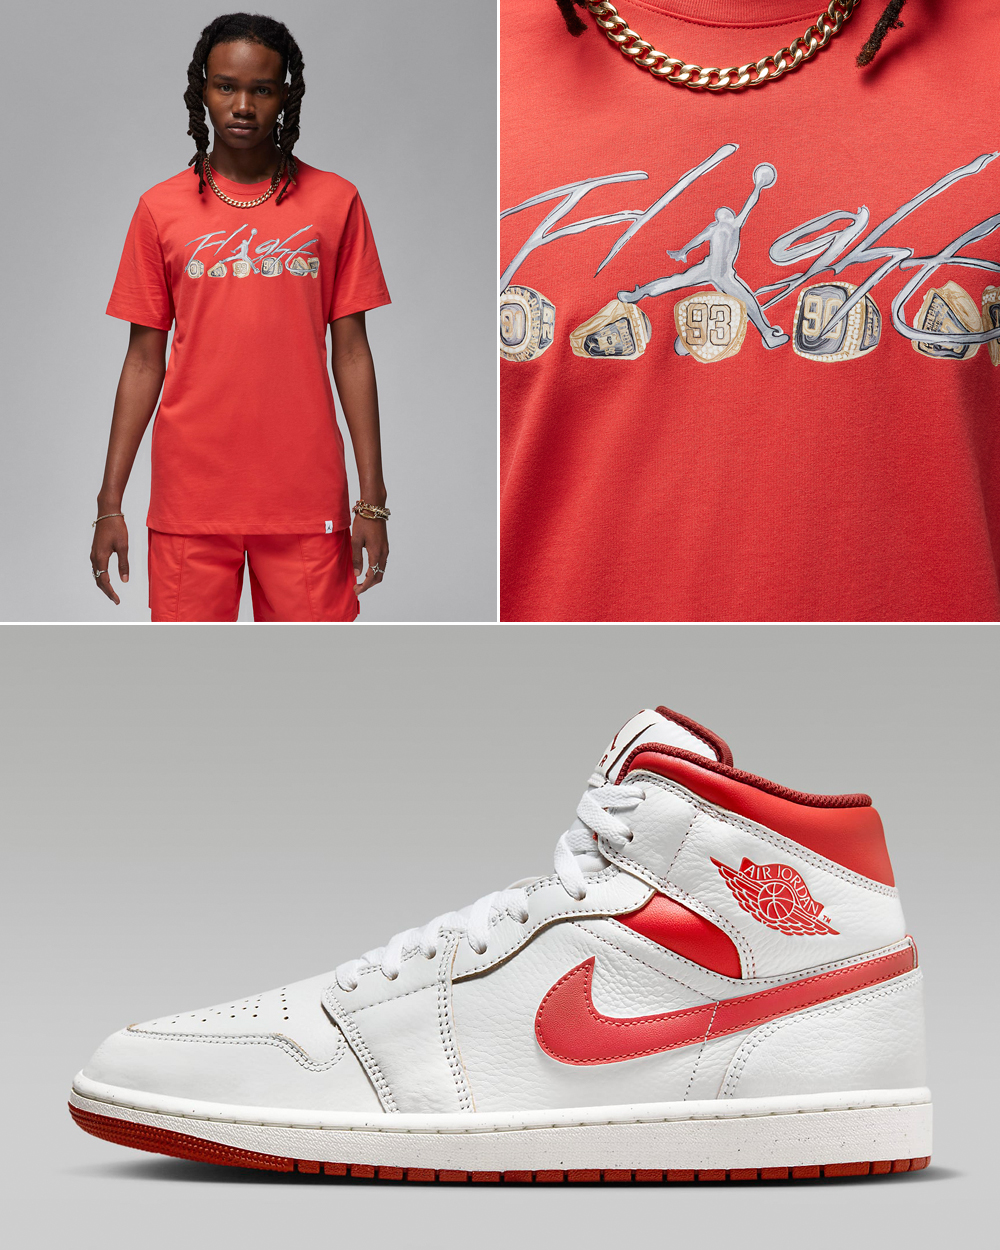 Air-Jordan-1-Mid-SE-White-Dune-Red-Lobster-Shirt-Matching-Outfit